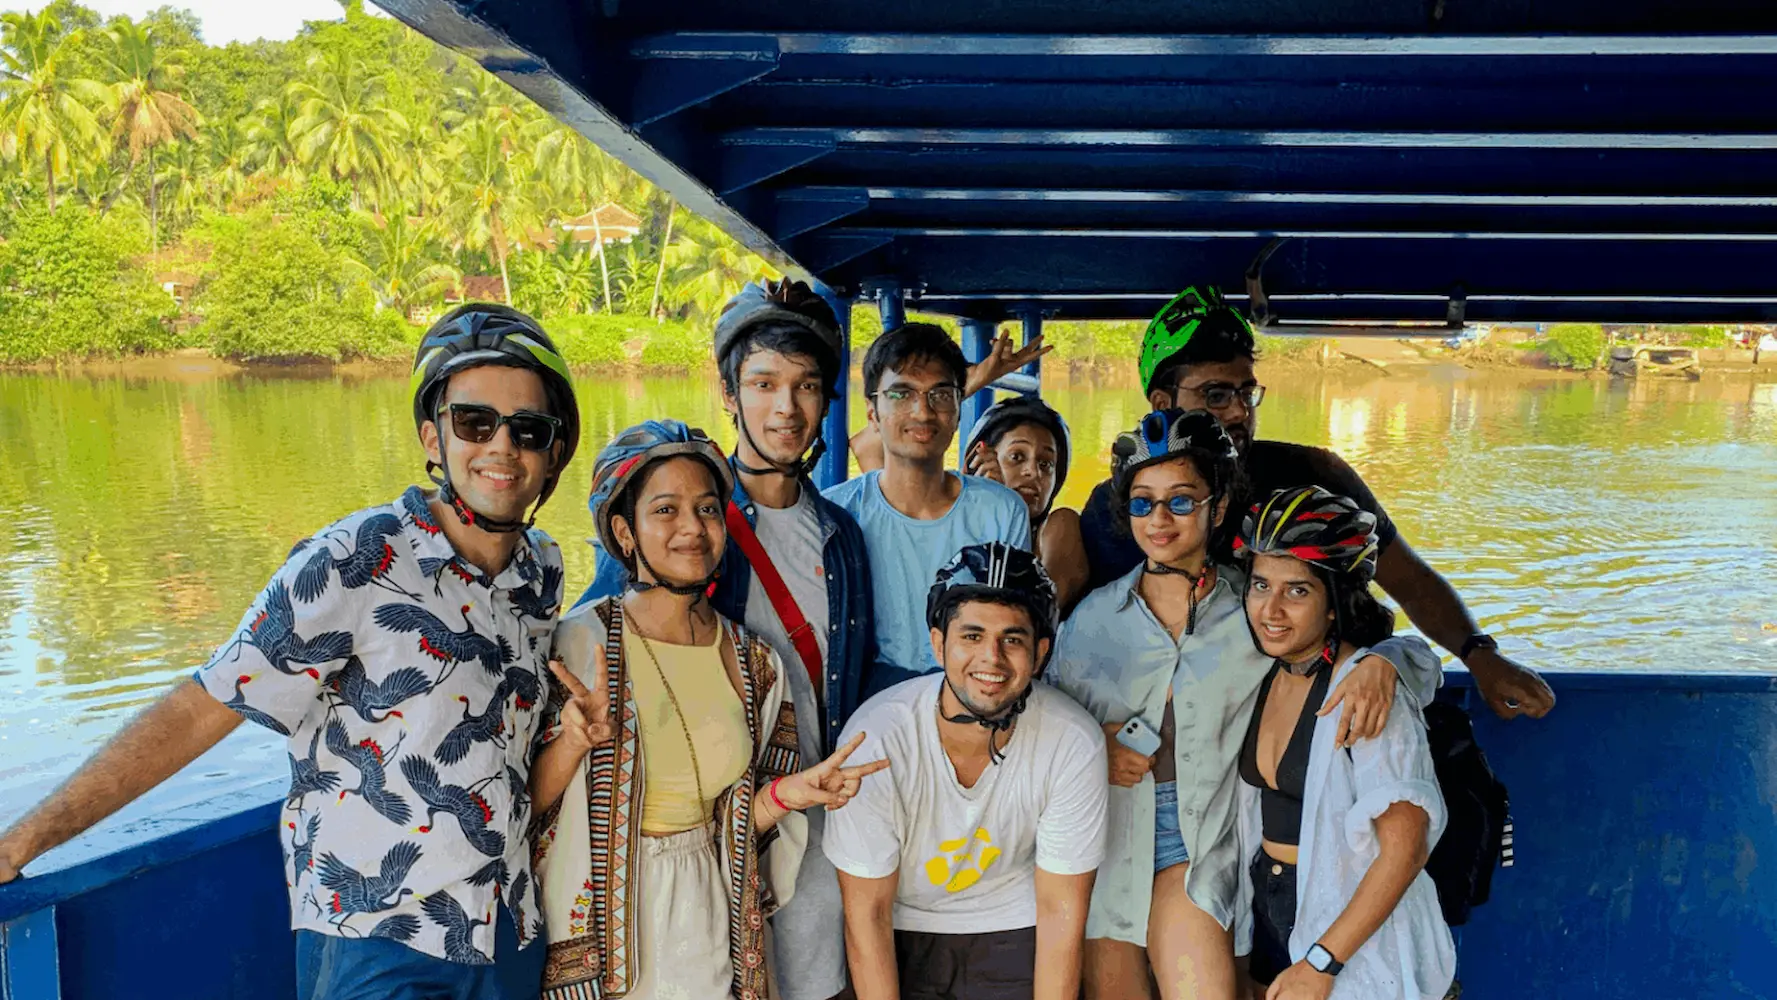 Free Your Spirit: Explore Goa at Your Own Pace with Cycling Zens